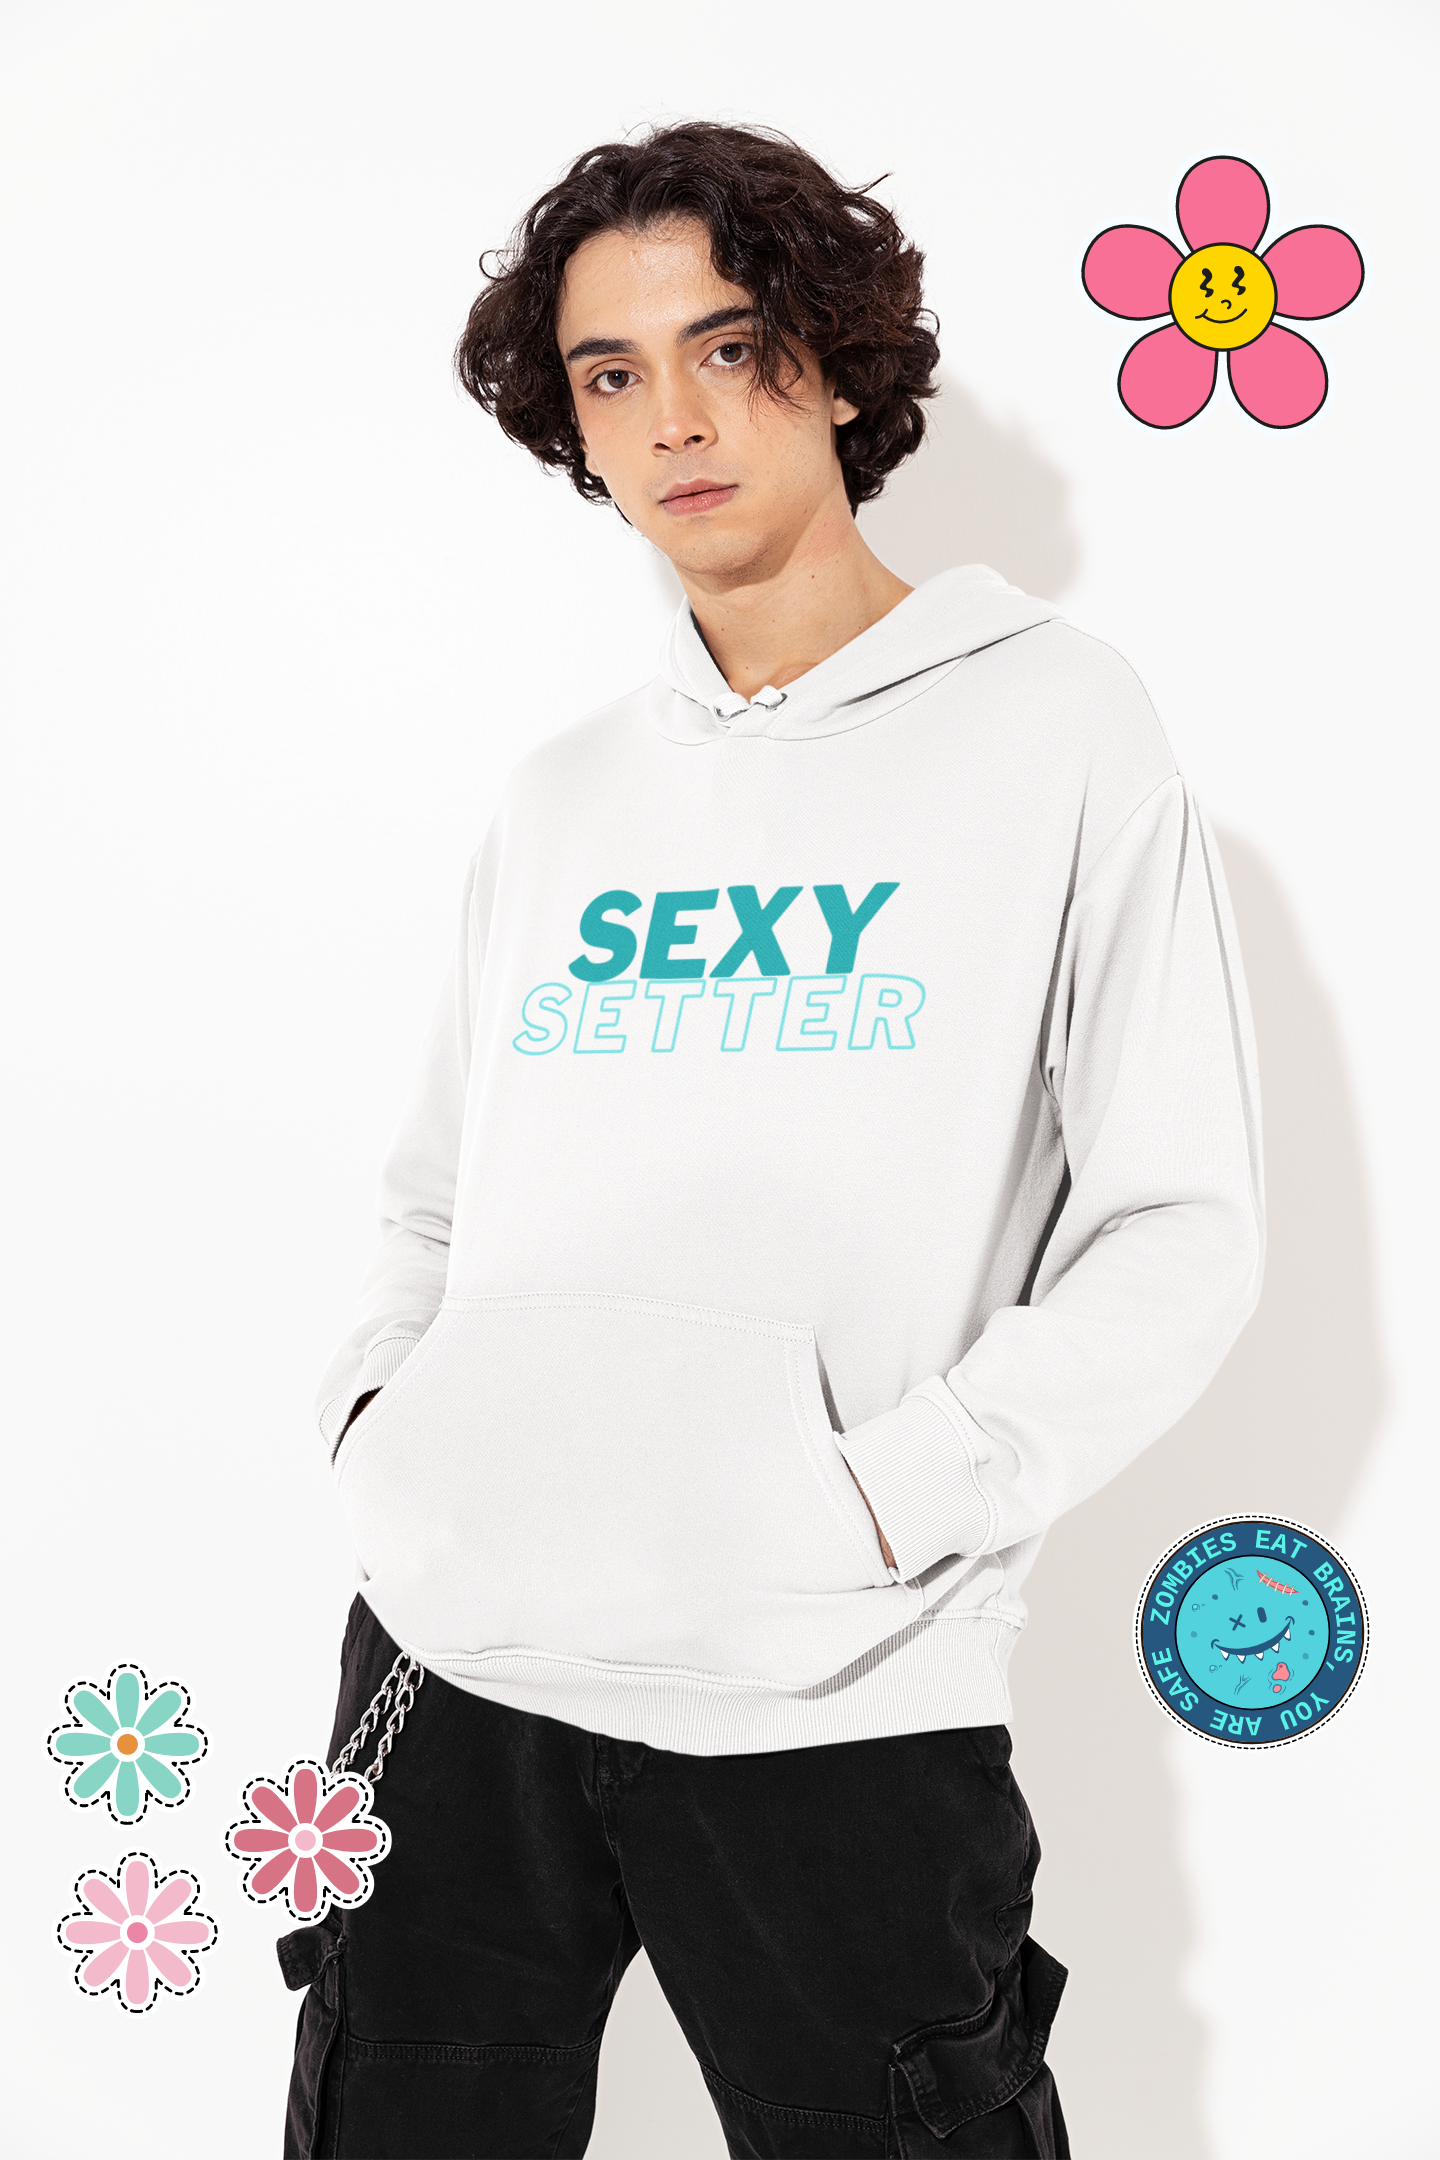 "Sexy Setter" by Volleybragswag...Setter Volleyball Shirts, Sweatshirts and Hoodies That Make Great Gifts For Volleyball Players. Available in my Volleybragswag ETSY shop...designs by Coach April